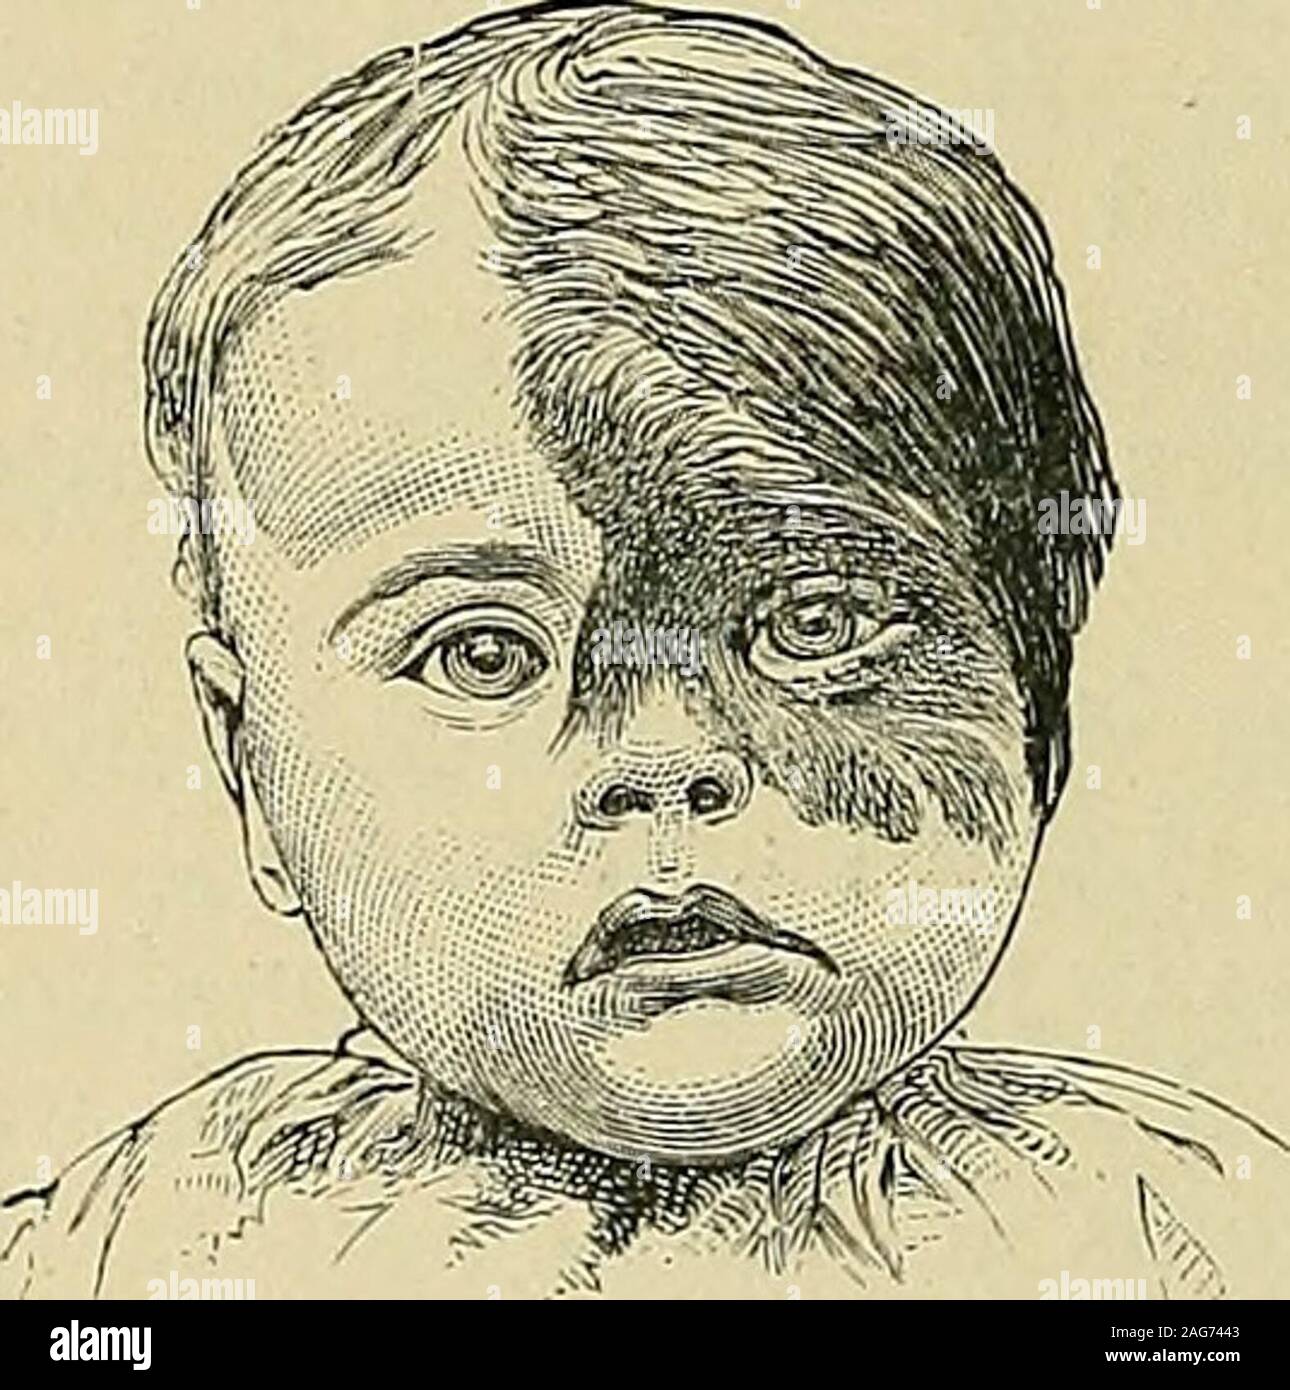 . The diseases of children : medical and surgical. us is one of the mosttroublesome of the skin diseases met with in tuberculous subjects, especiallyas great deformity and disfigurement are often produced by its ravages.On scraping out a lupus tubercle a hollow or pit is seen in the thicknessof the dermis, while at the edge of the patch the superficial part of the skinis undermined. Treatment.—The general treatment is that of tuberculosis, cod-liver oiland arsenic being of especial value. Locally nothing is so effectual asthorough removal of the disease mechanically. It is best to give ananaes Stock Photo